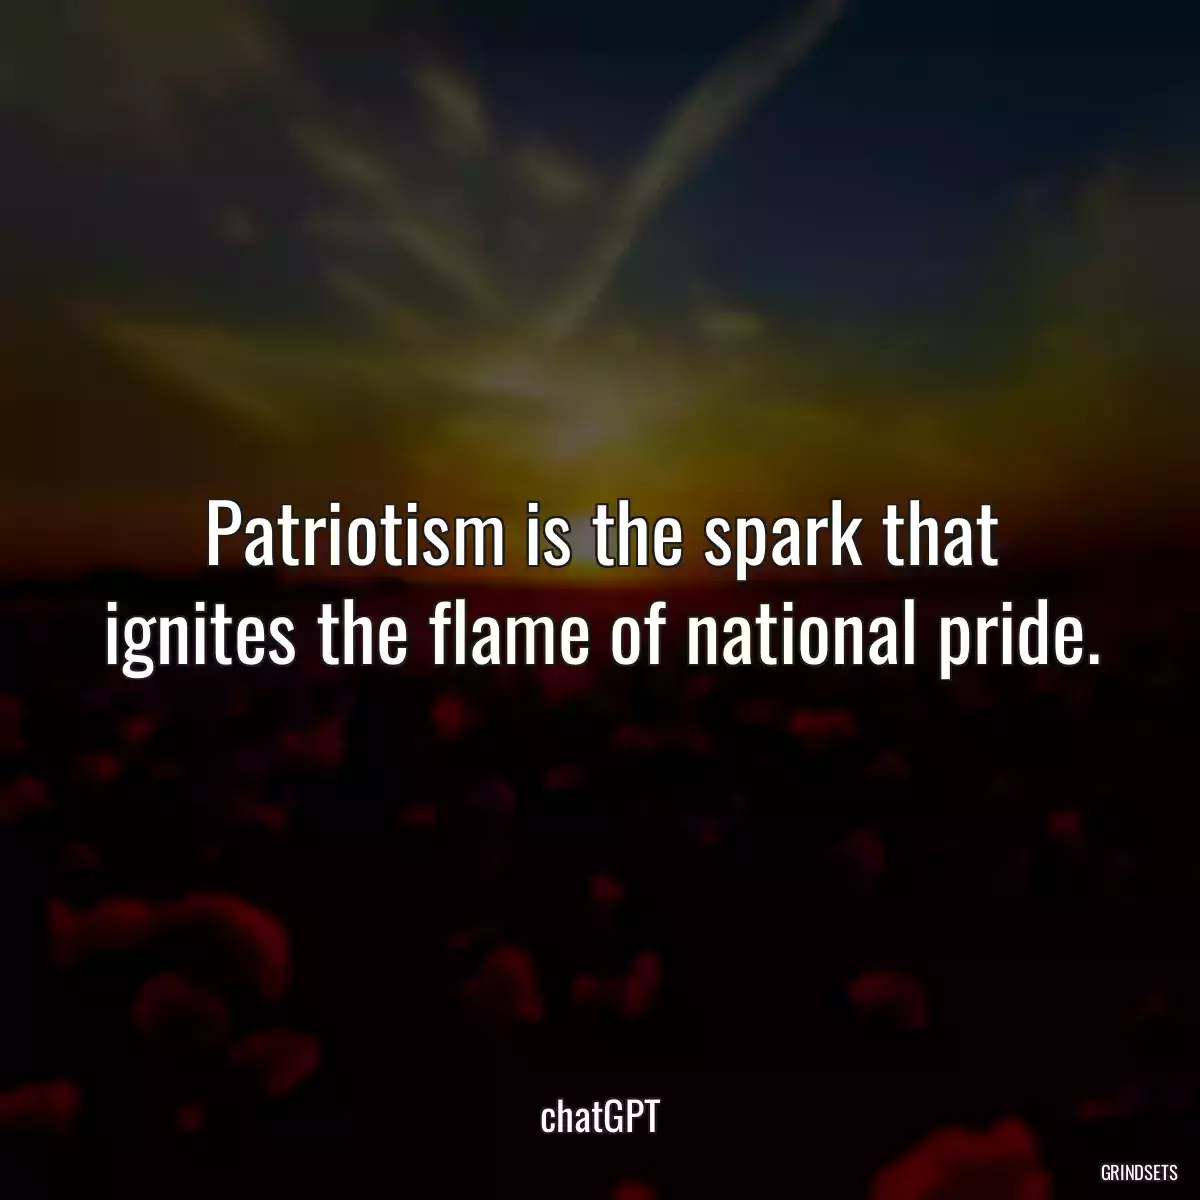 Patriotism is the spark that ignites the flame of national pride.